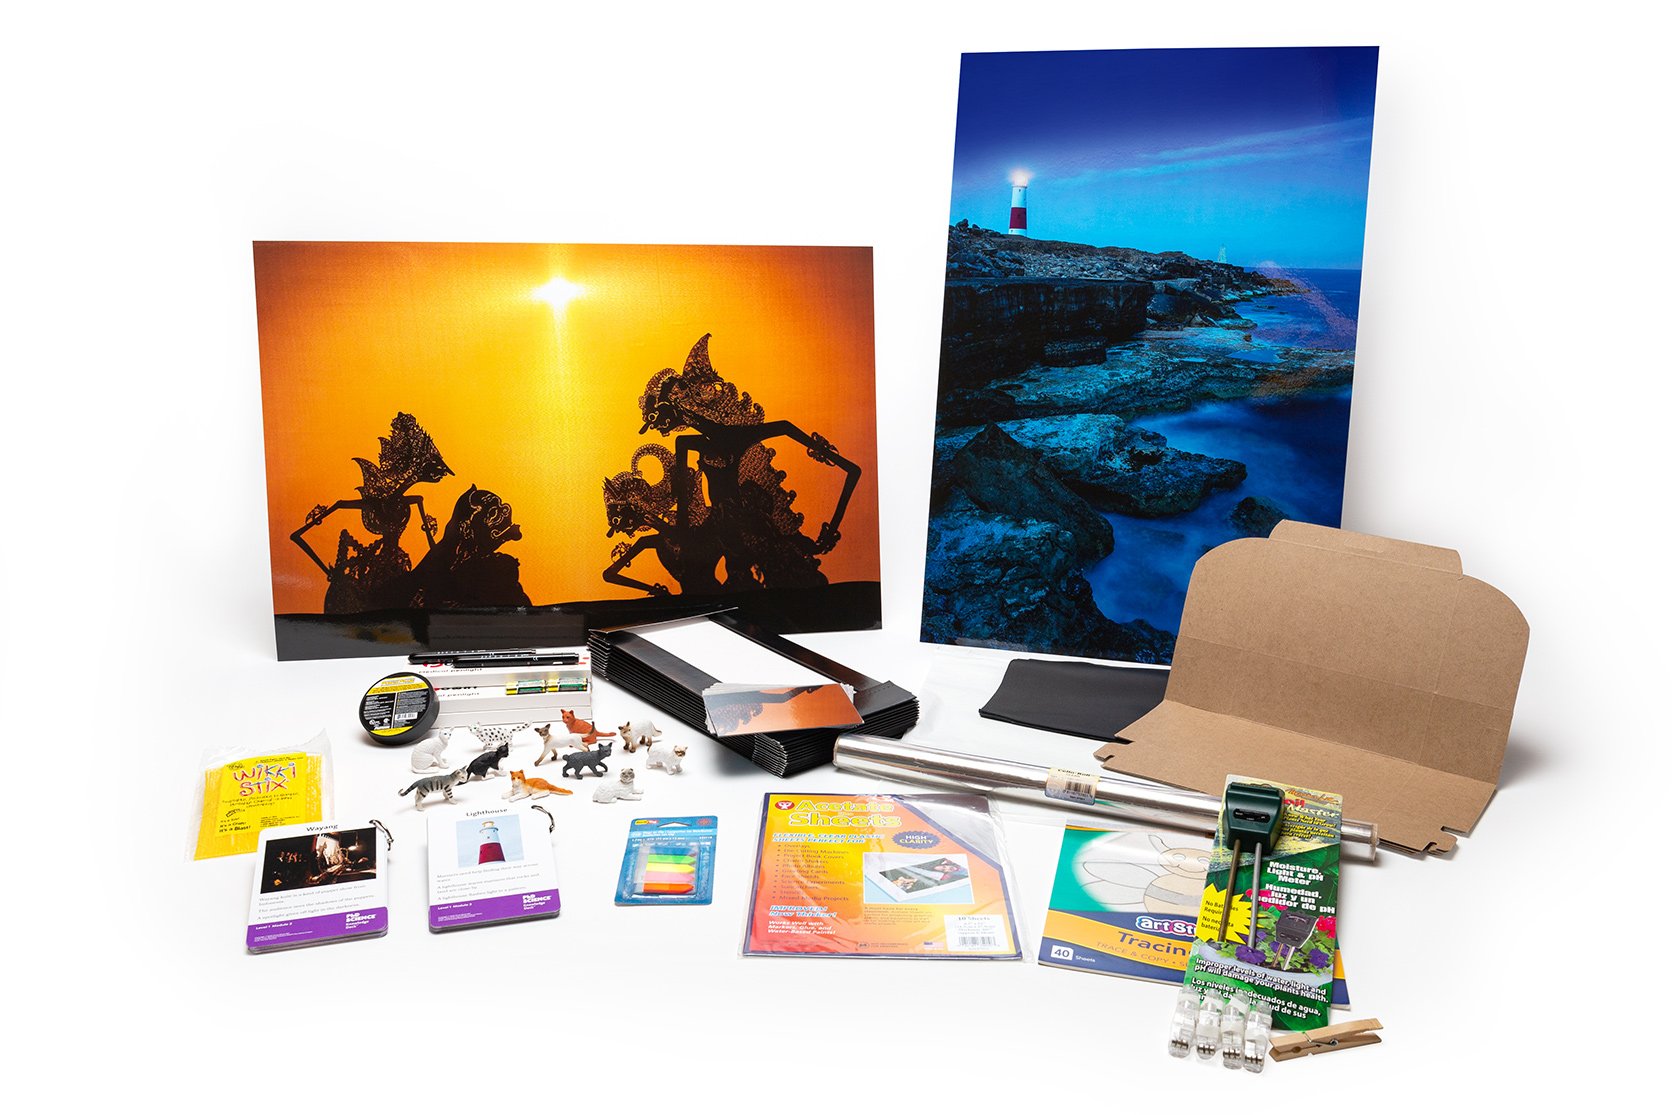 PhD Science hands-on materials kit from Level 1 Module 2 that includes a light meter, cardboard boxes, Knowledge Deck cards and posters, and penlights